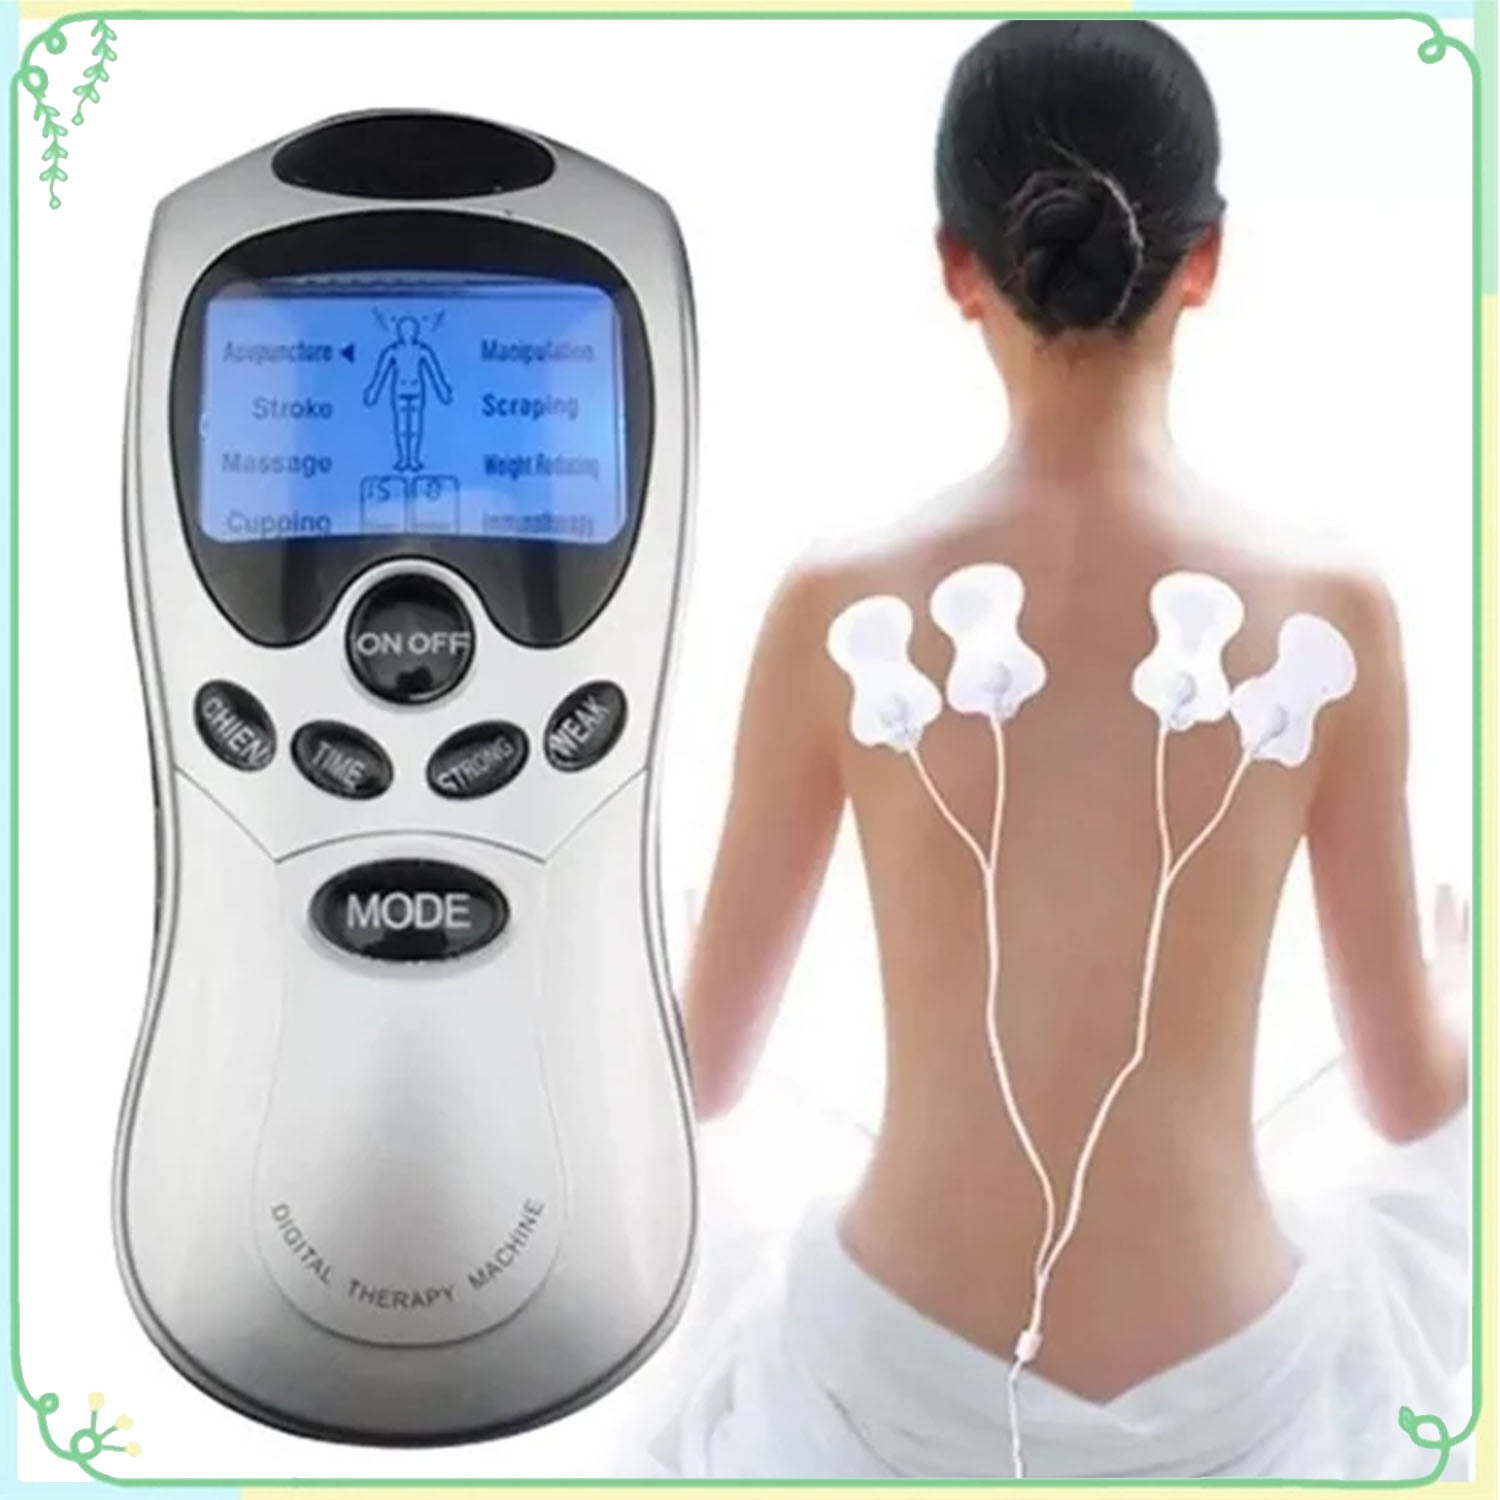 Pohaku TENS Unit 4 Outputs, EMS Unit Muscle Stimulator for Pain Relief, Rechargeable  TENS Machine Electronic Pulse Massager, Electric Stimulator Physical  Therapy with 24 Modes and 10 Electrode Pads - Coupon Codes